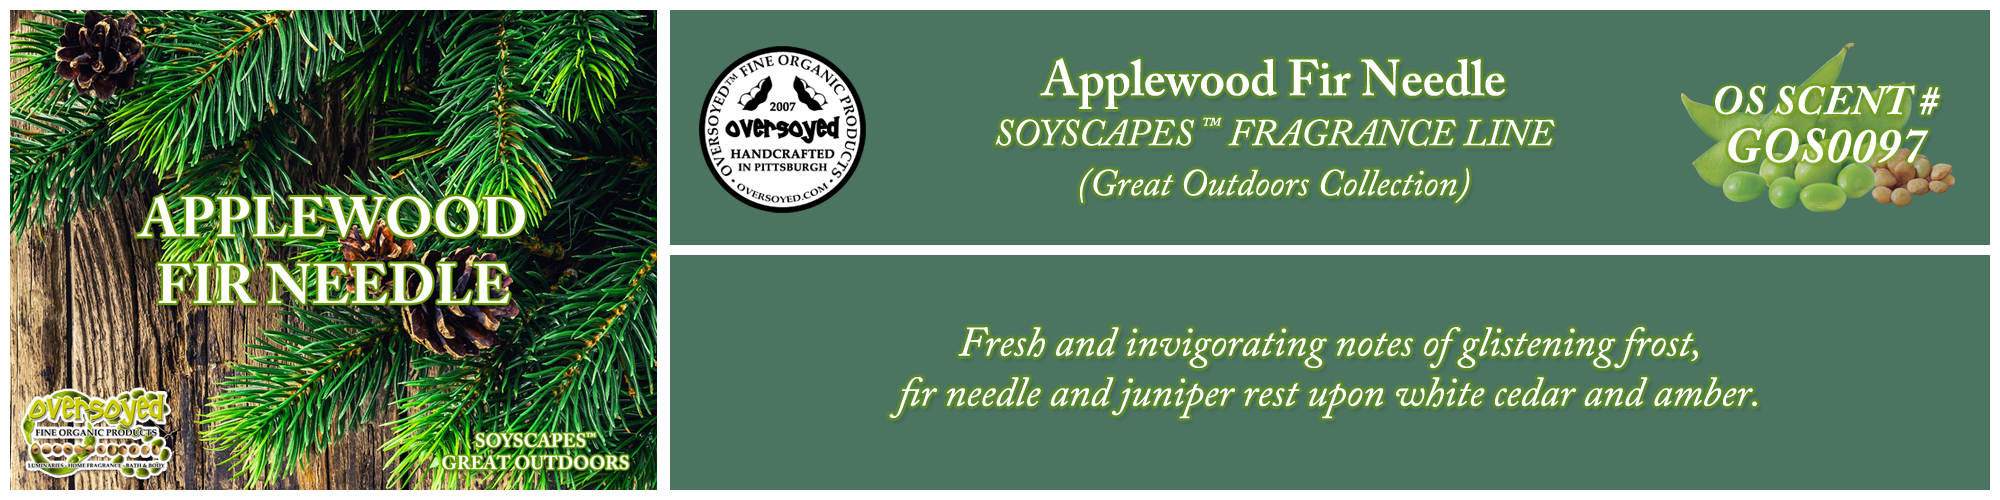 Applewood Fir Needle Handcrafted Products Collection